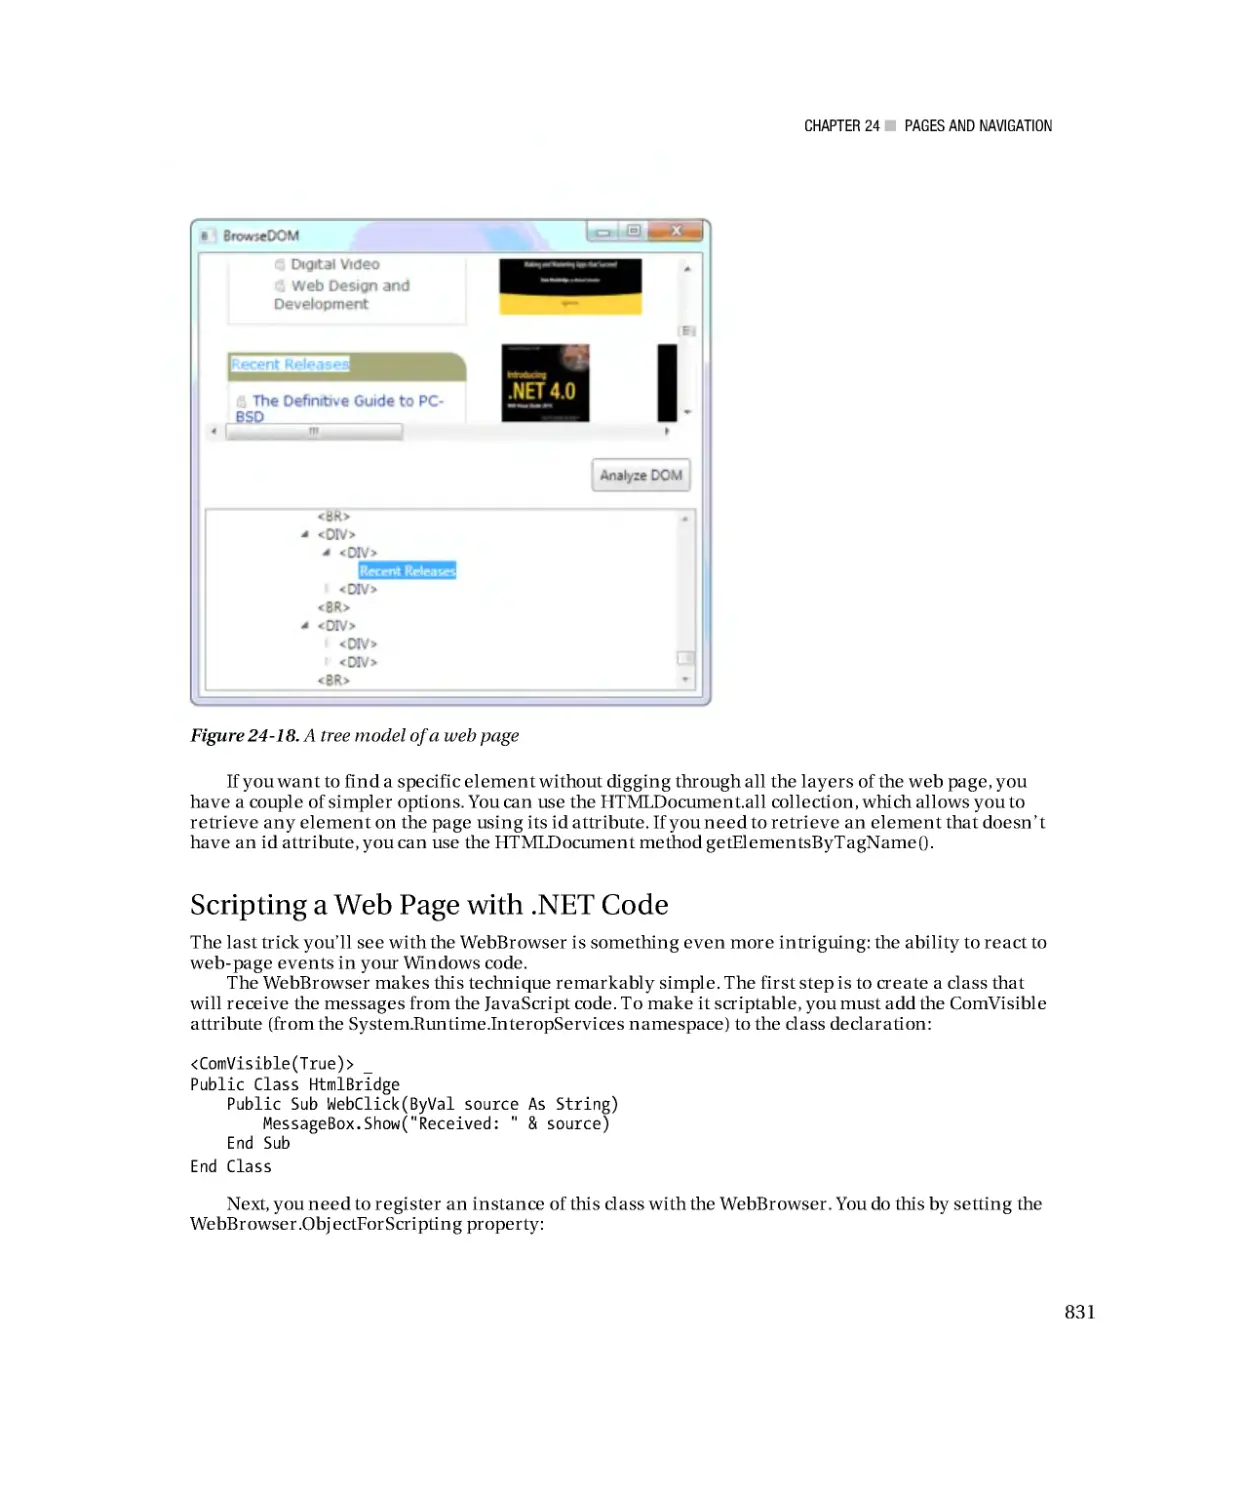 Scripting a Web Page with .NET Code